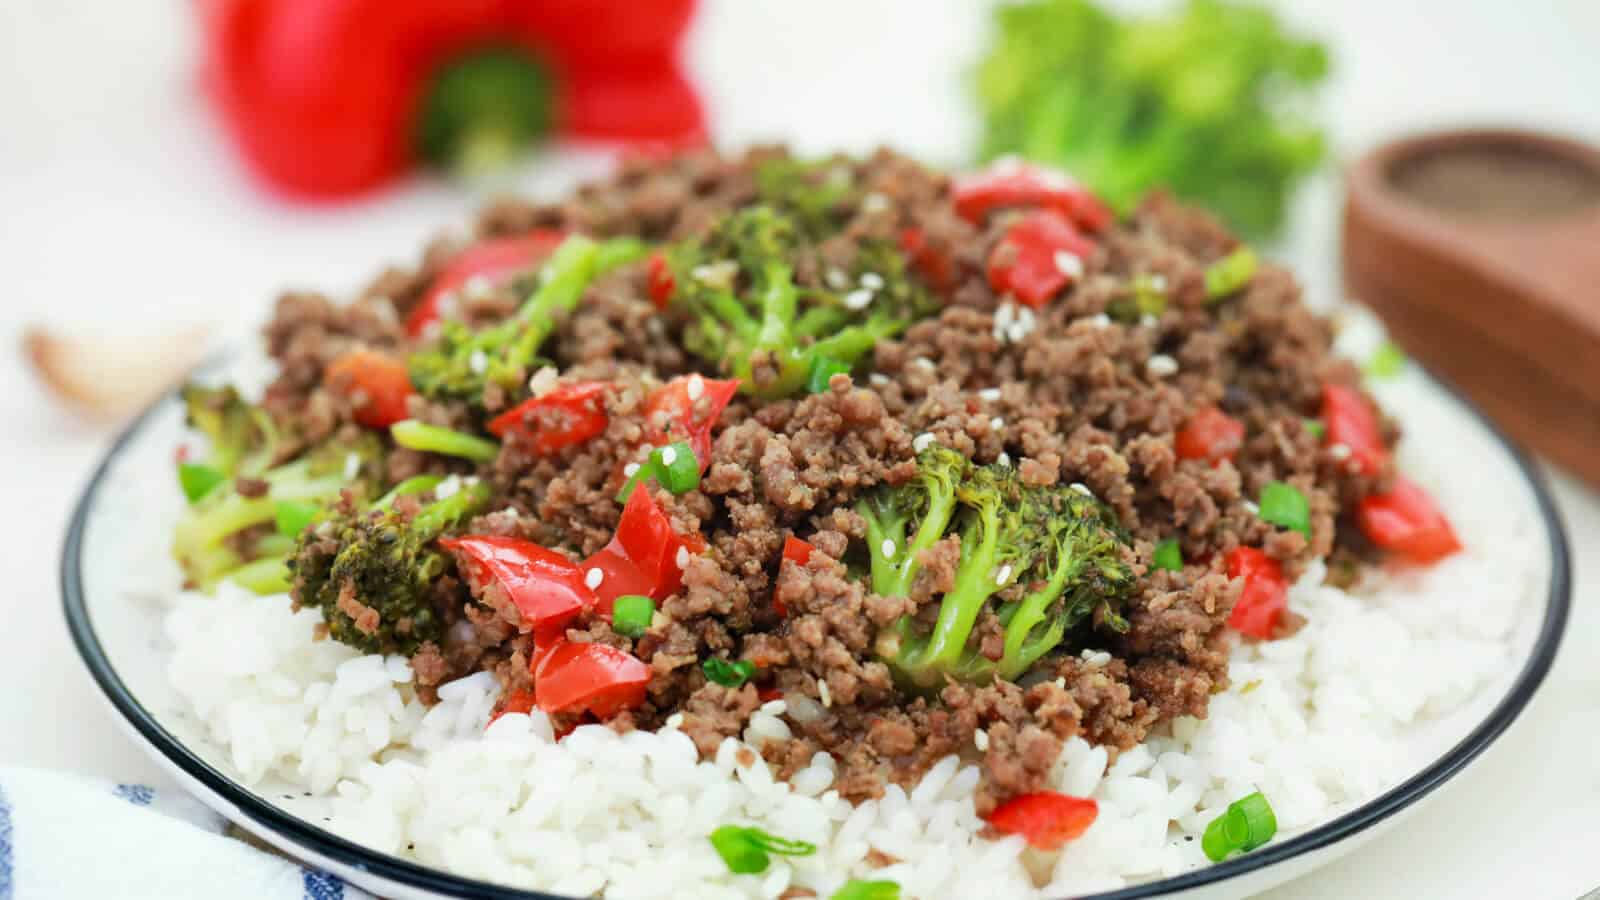 Korean beef and broccoli with rice in a bowl.